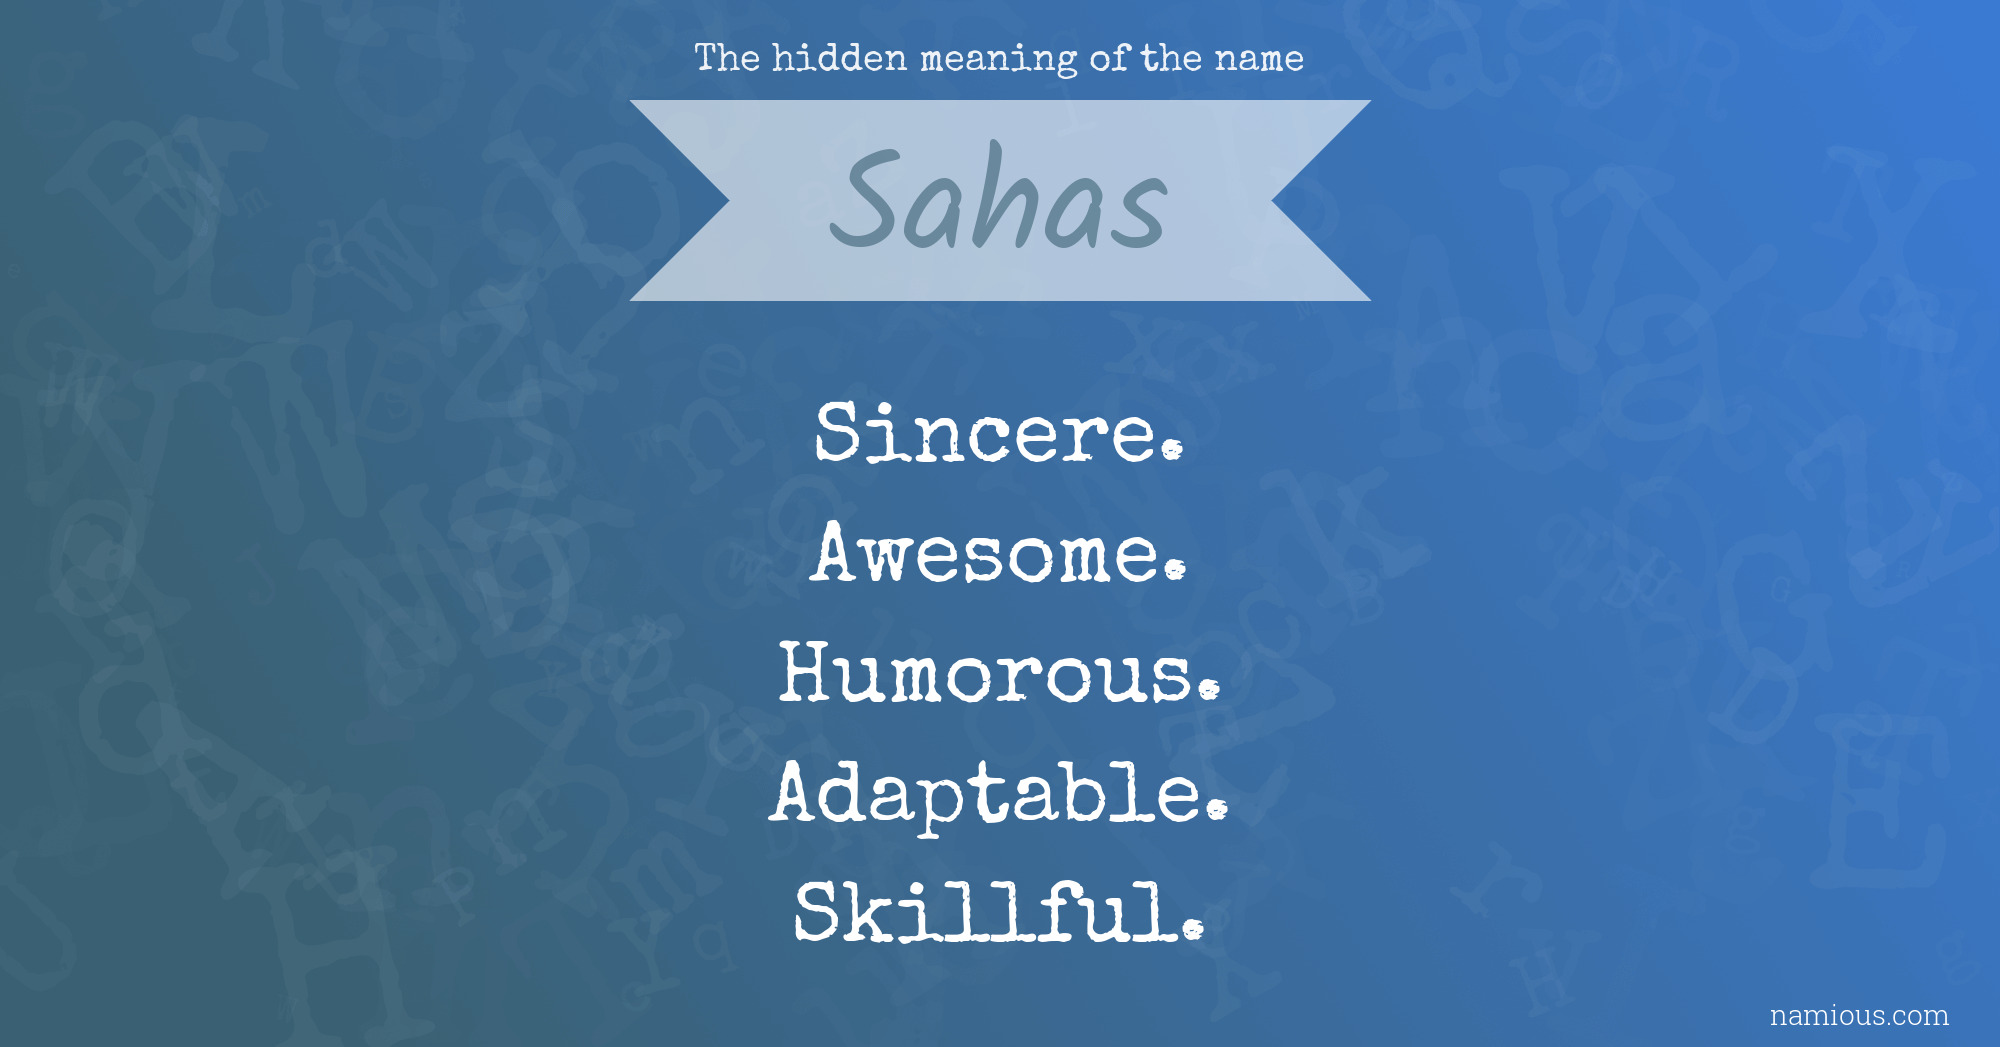 The hidden meaning of the name Sahas